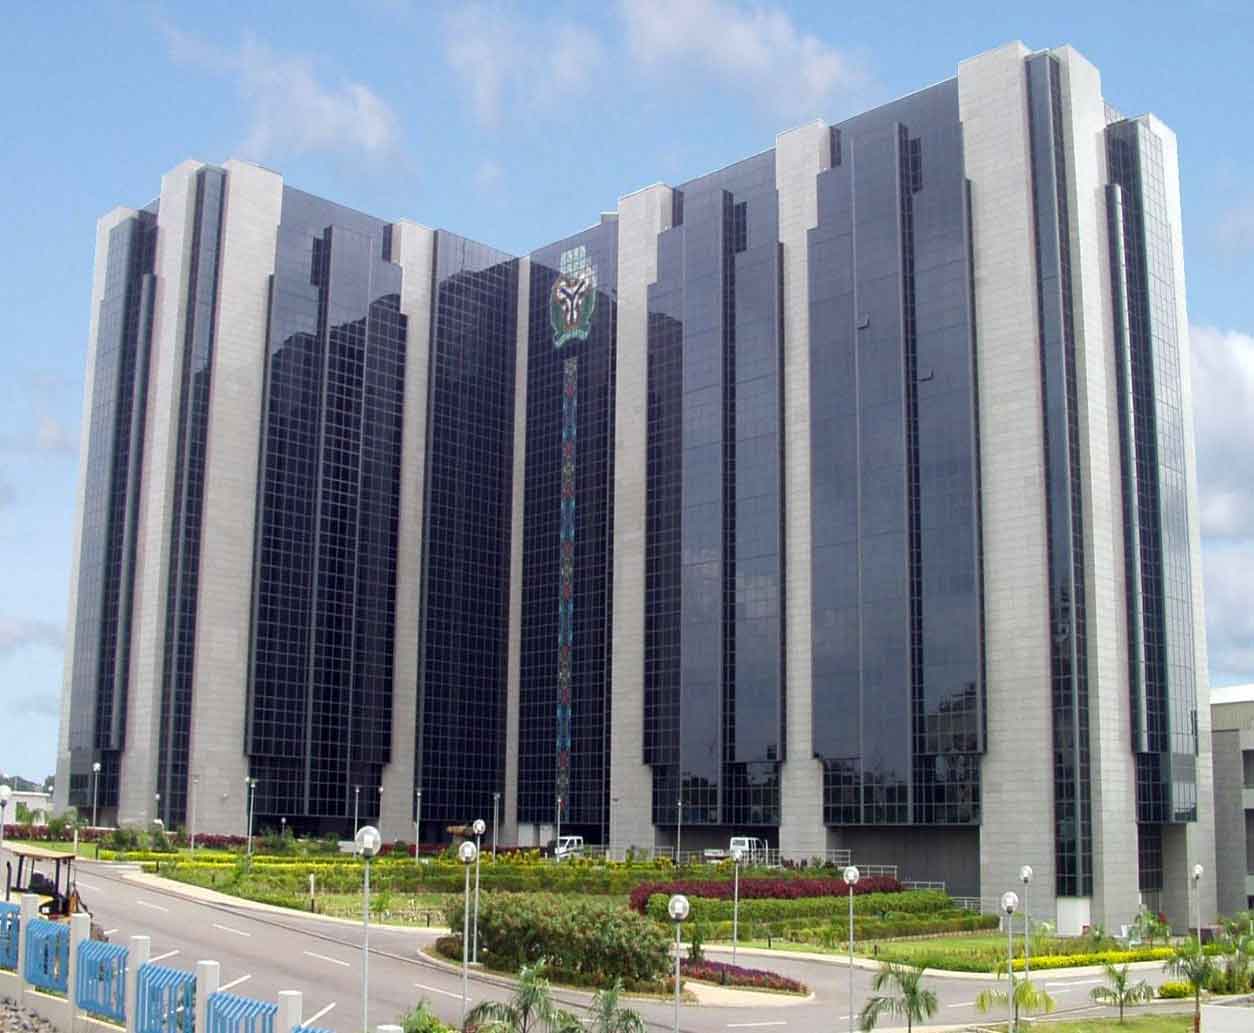 CBN Scandal: Leaked Audio Authentic But Selective, Bank Says; Claims No Money Lost